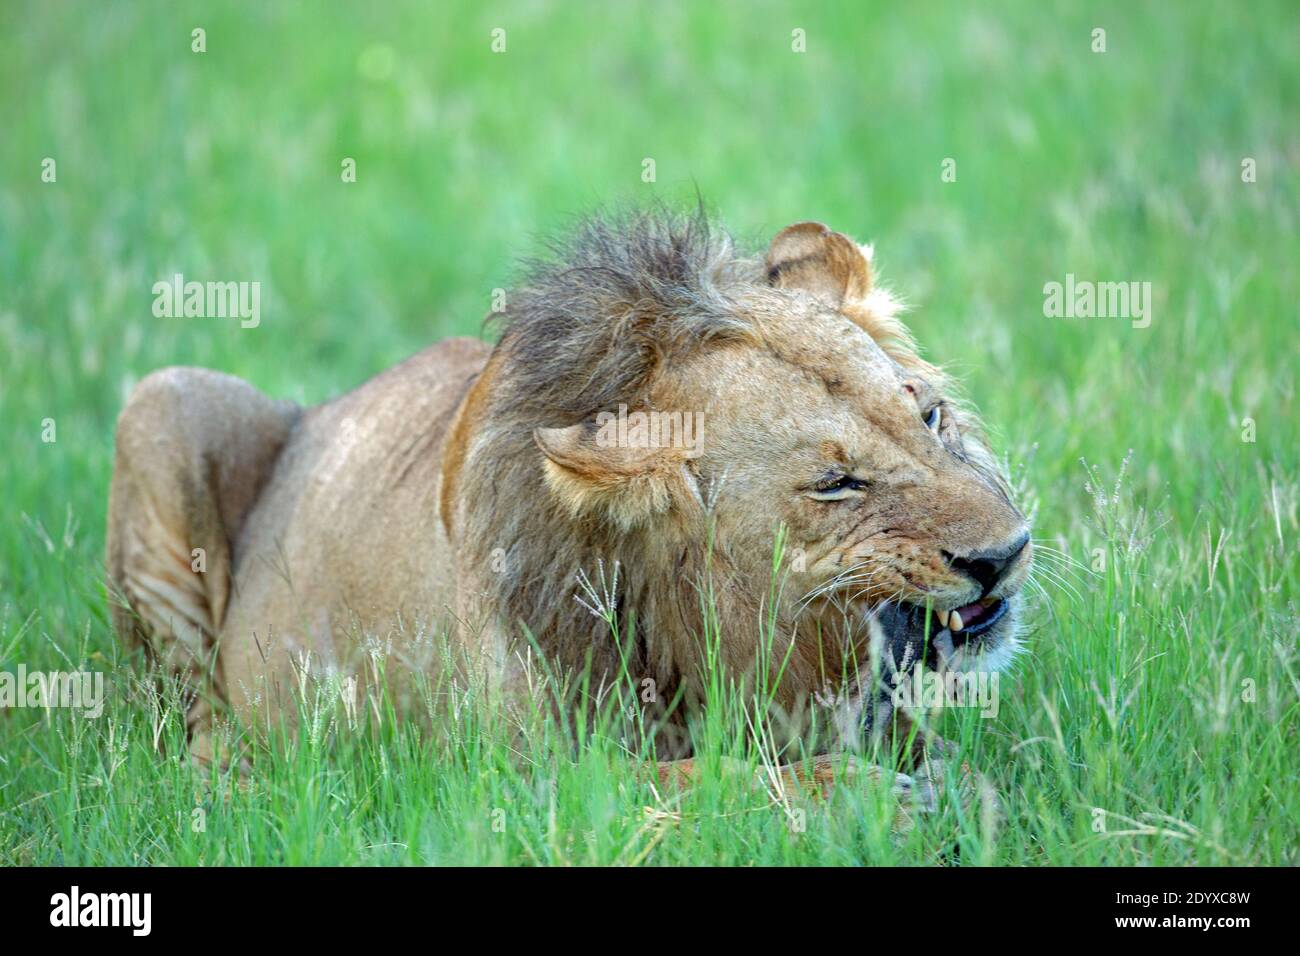 African Lion (Panthera leo). Older male. Single, alone, scavenging for food items, with now worn imperfect teeth. Stock Photo